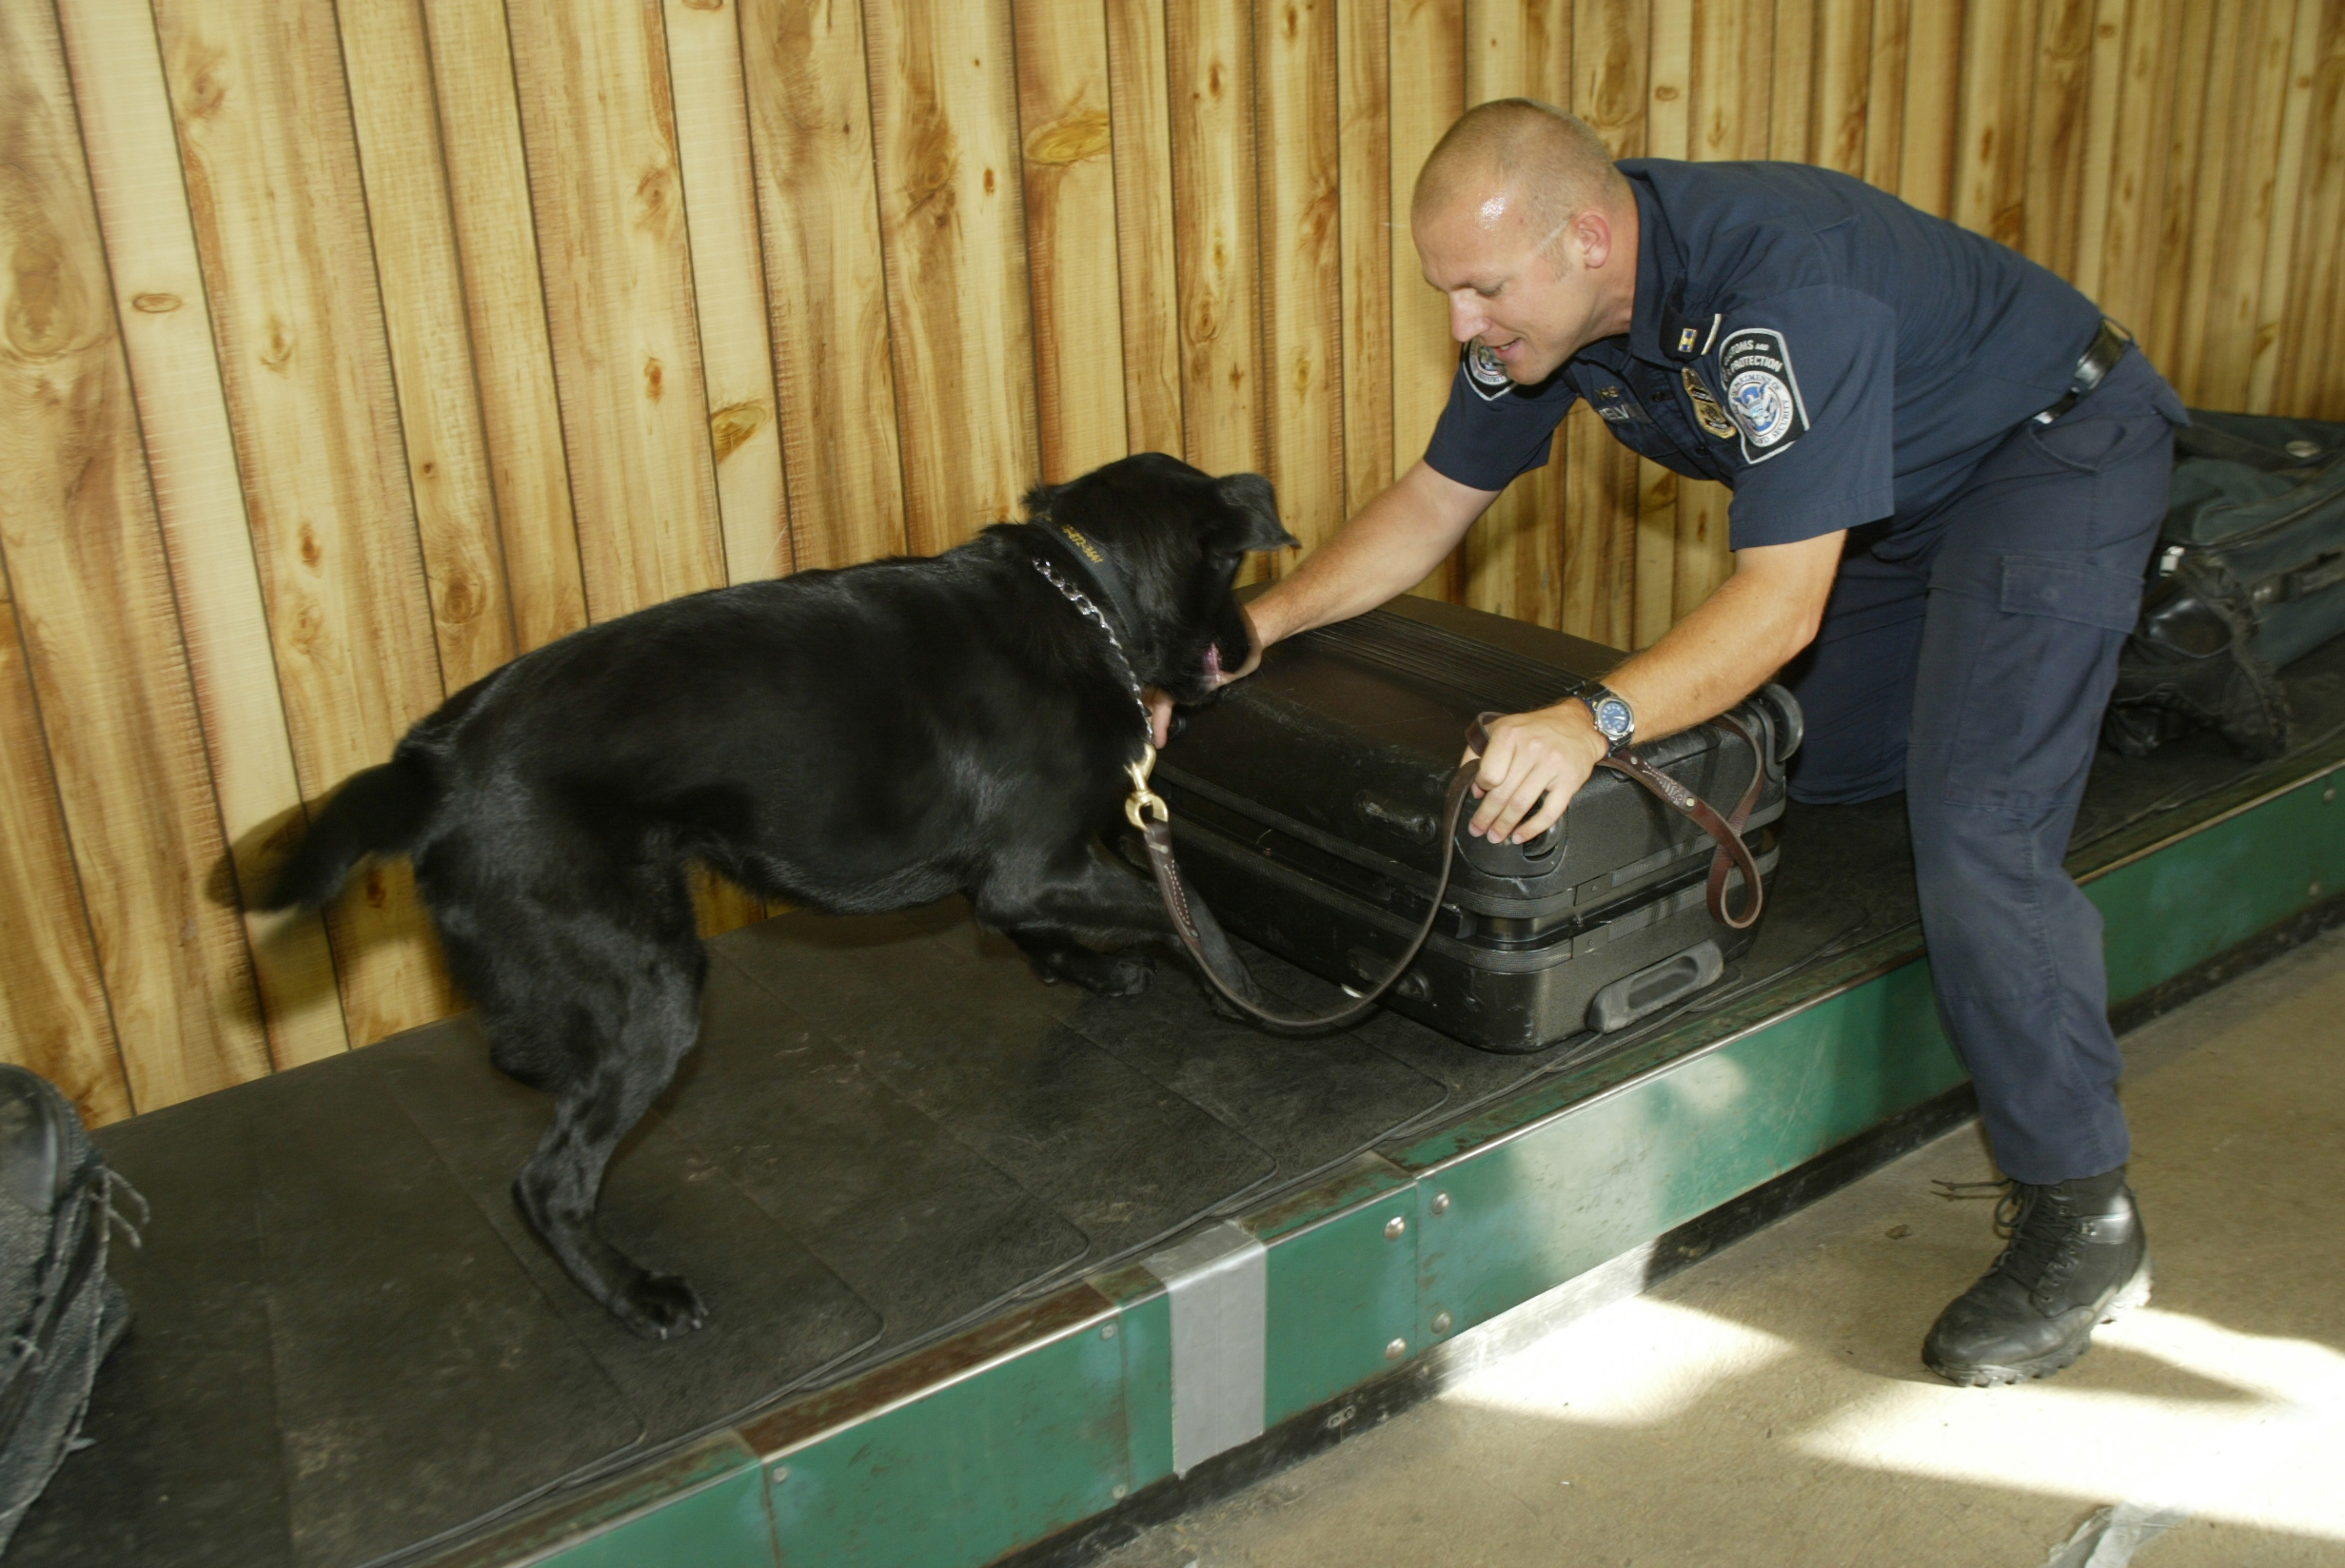 Canines are trained in environments that simulate where they will work. Here a handler trains a canine on a baggage belt. (Image Credit : James Tourtellotte, CBP)